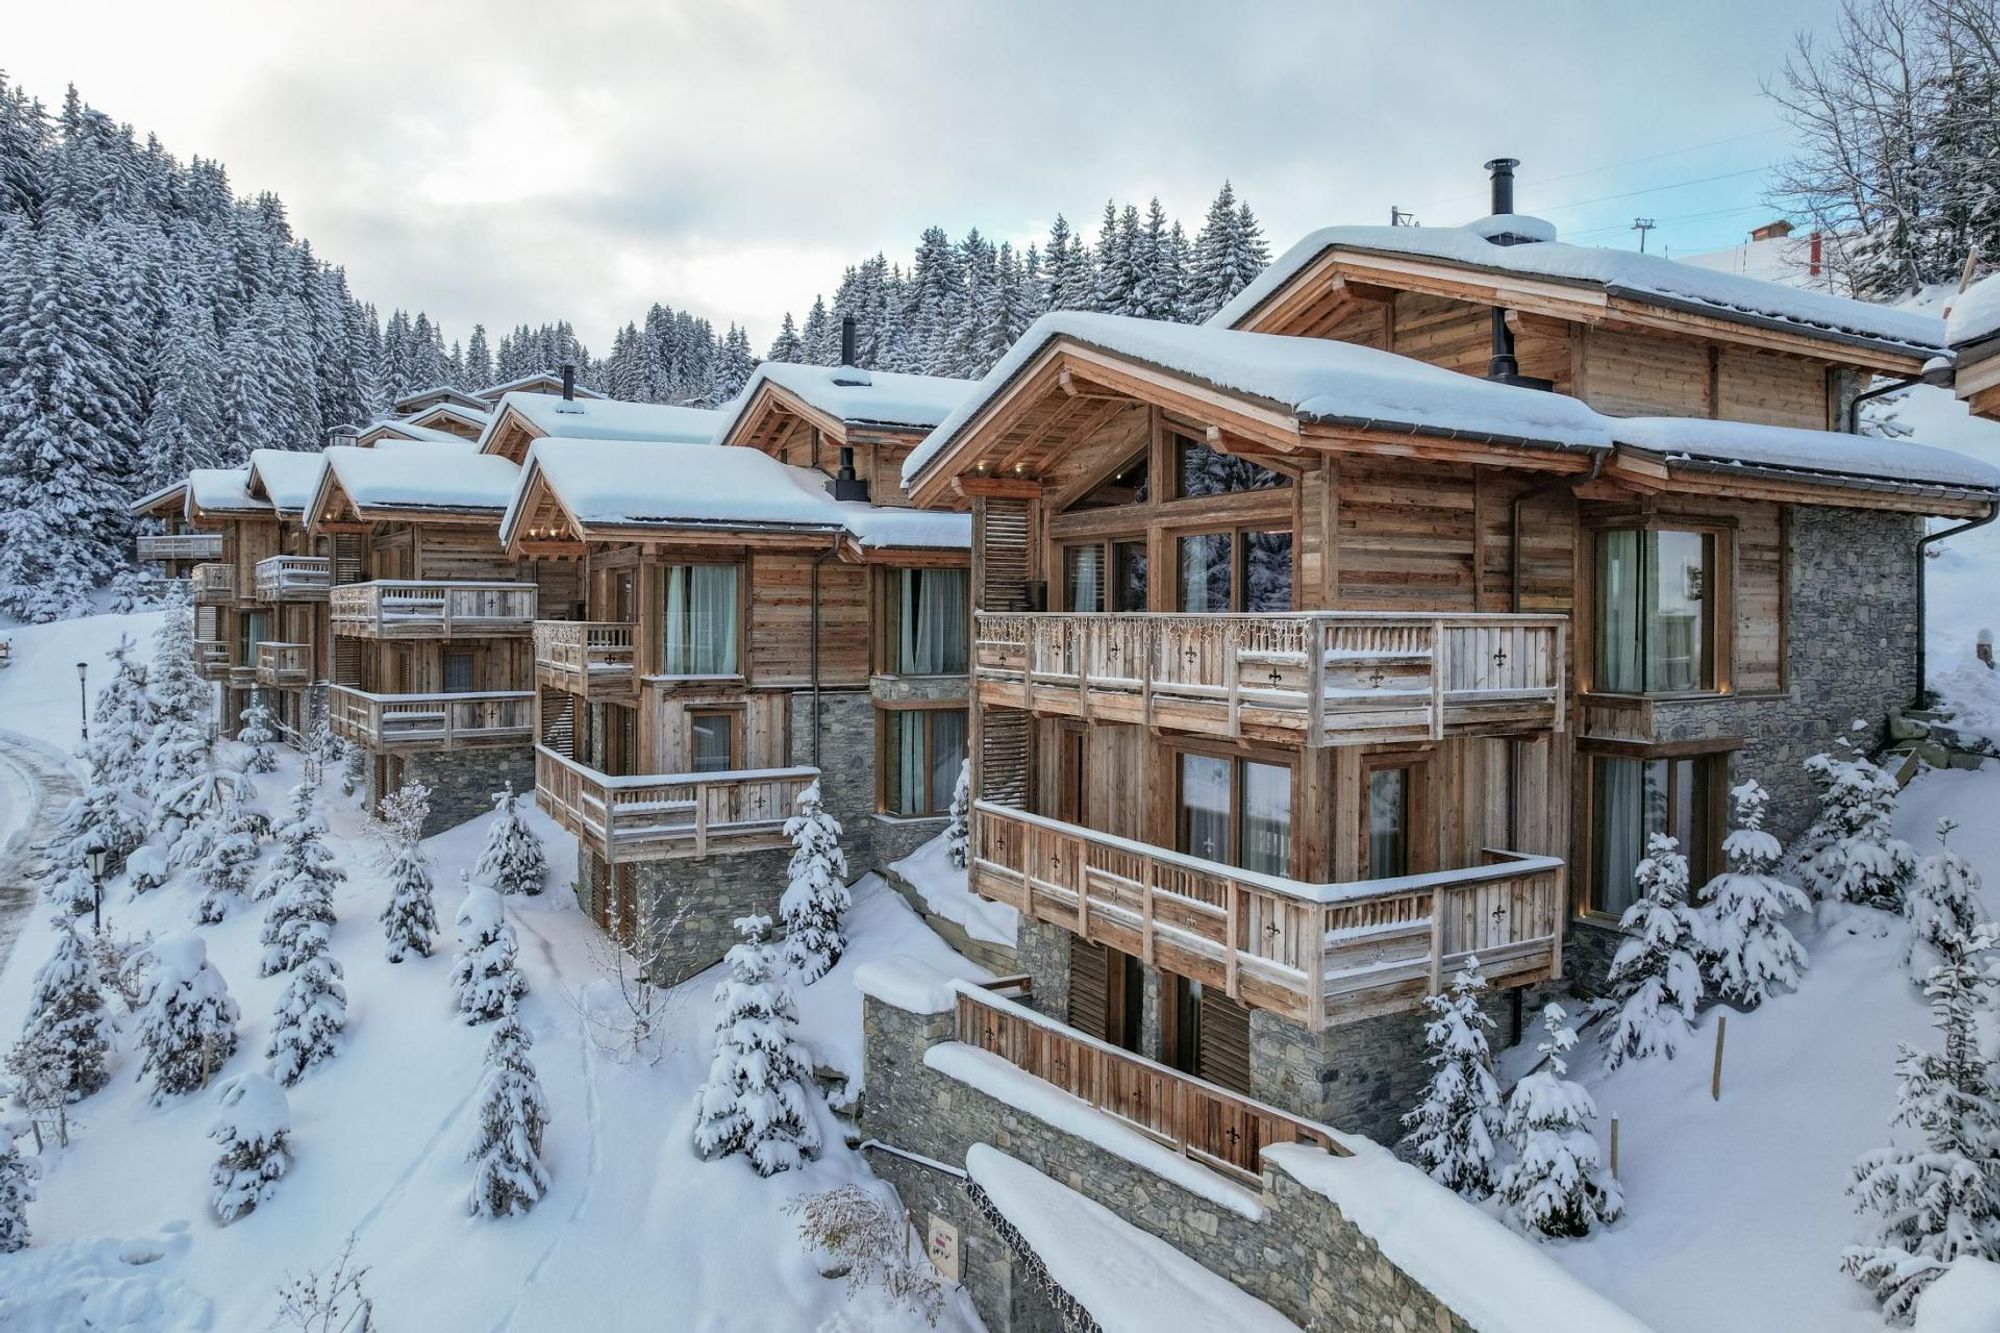 The luxury catered chalet in Courchevel is more than just a place to stay.